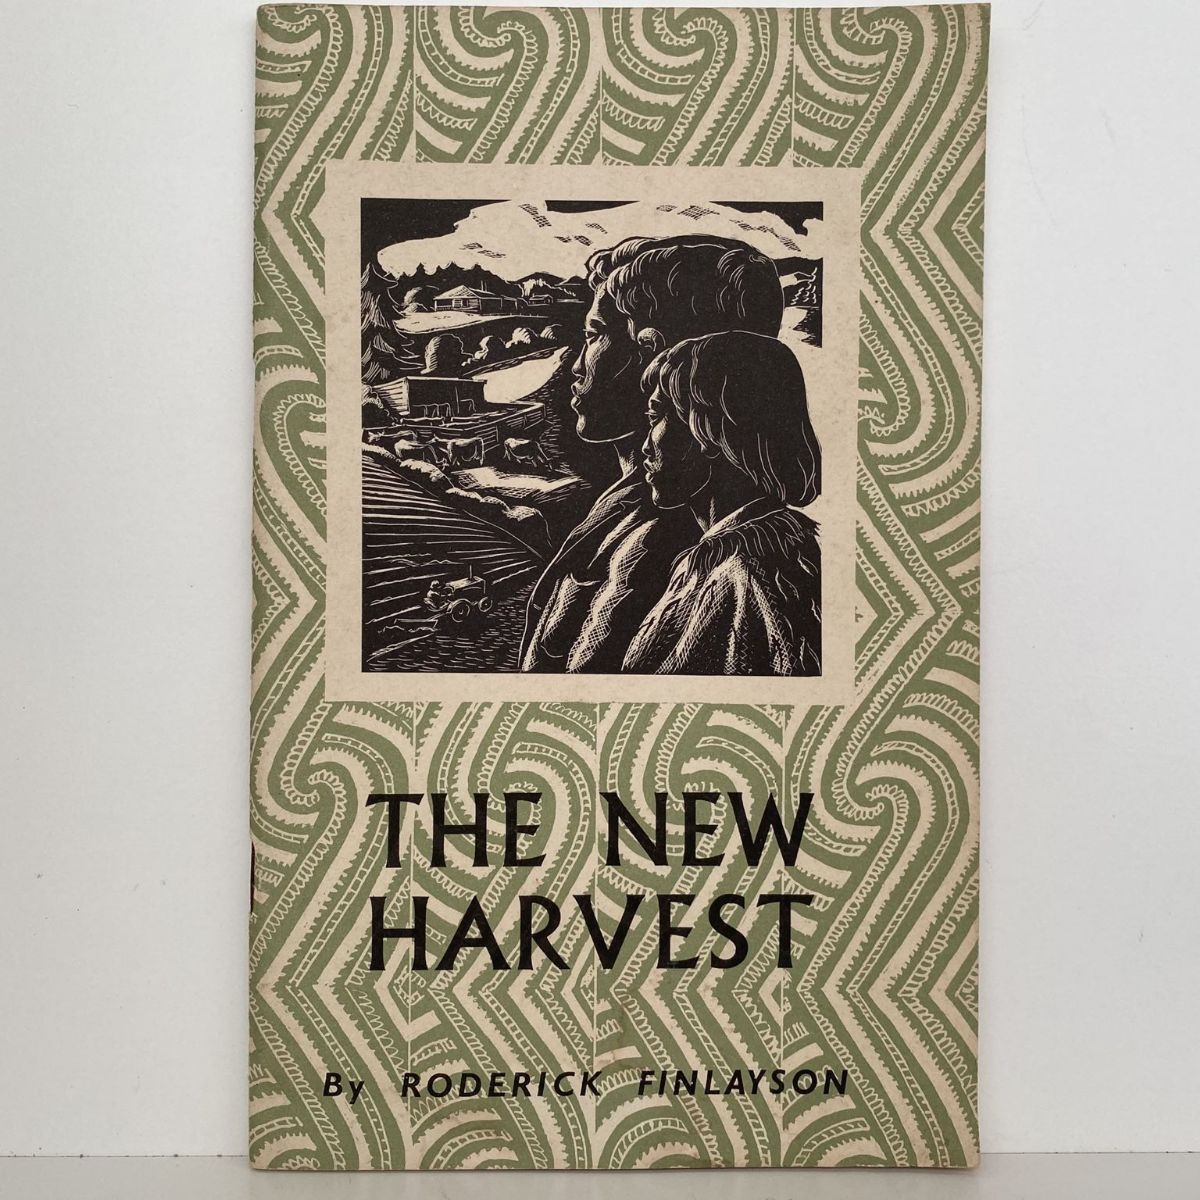 THE NEW HARVEST